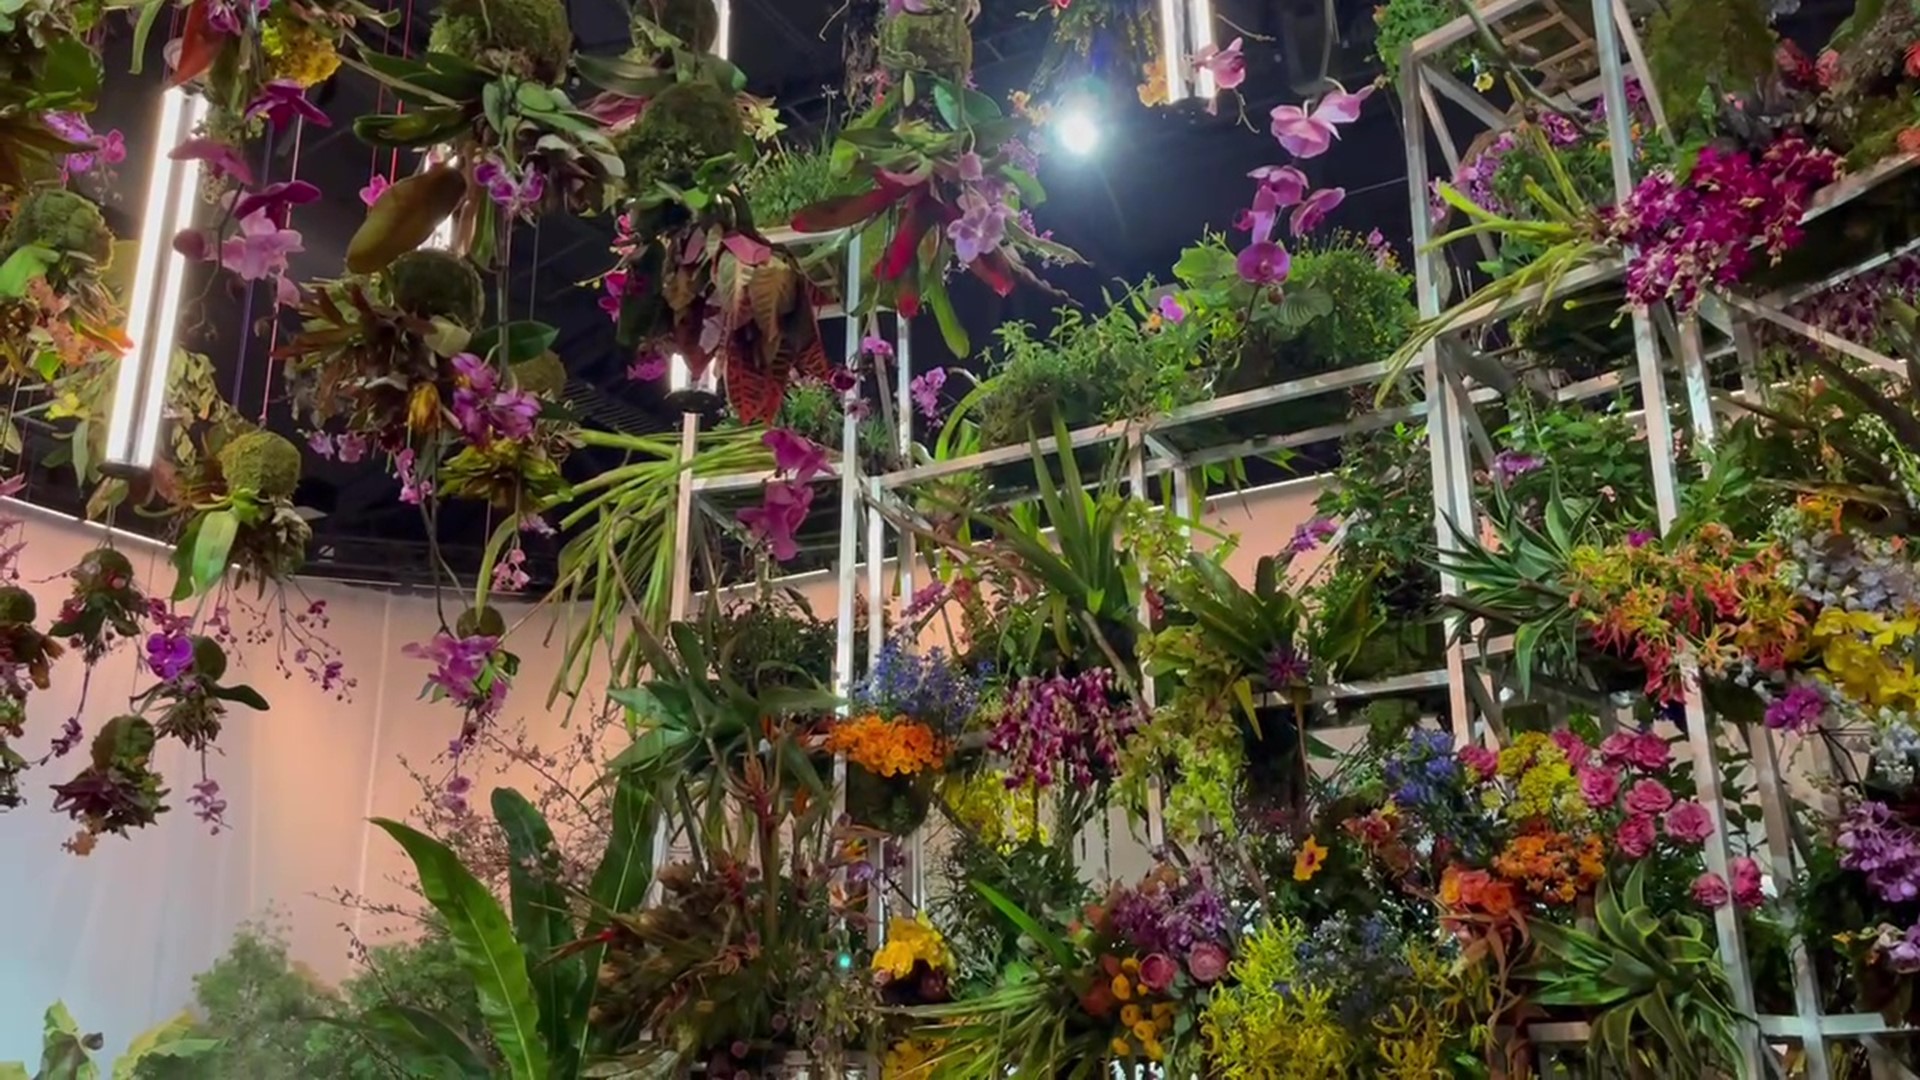 This year's theme is Garden Electric, so the color comes from flowers and technology.